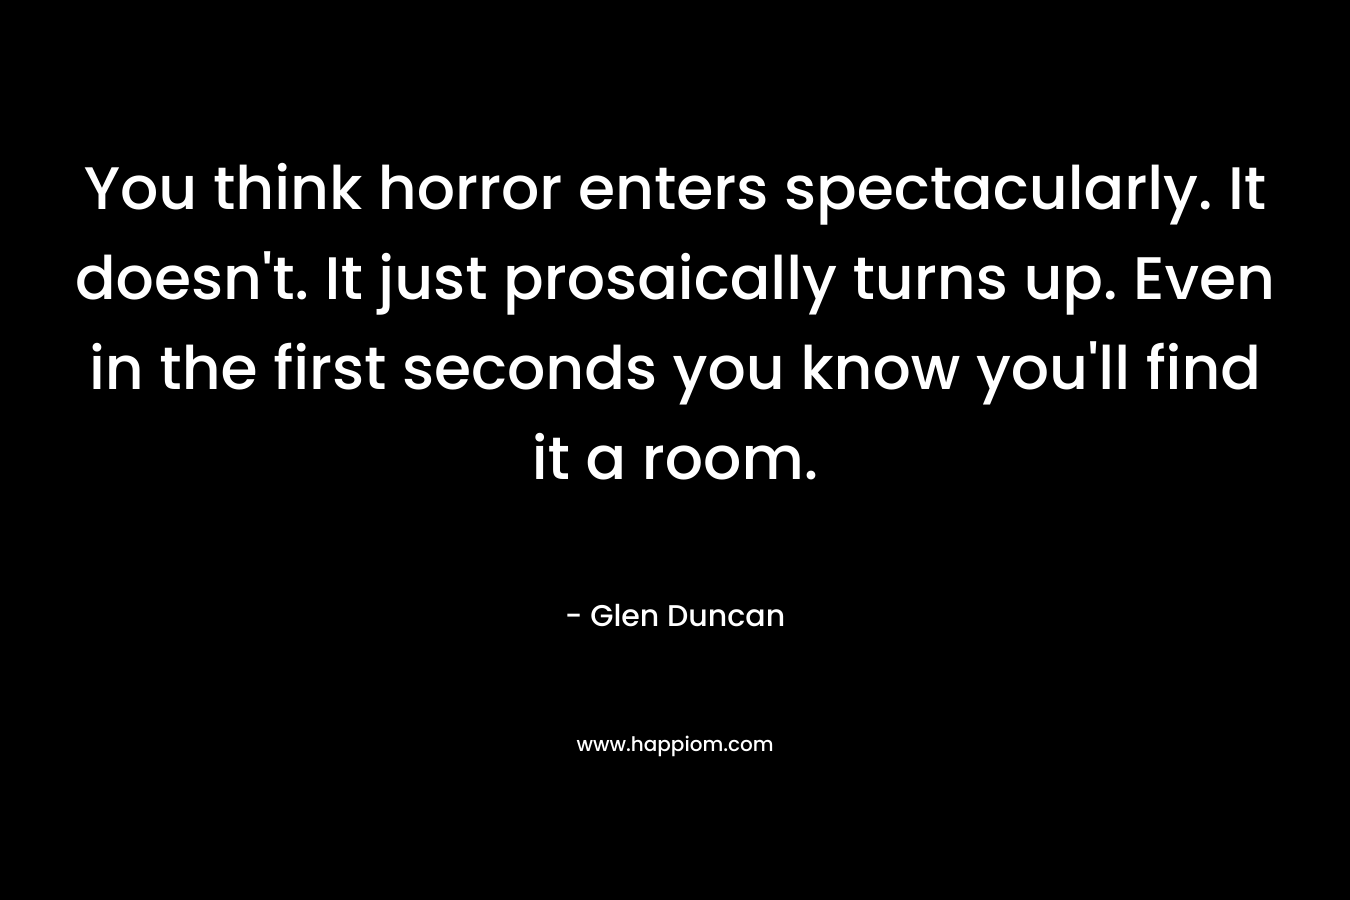 You think horror enters spectacularly. It doesn’t. It just prosaically turns up. Even in the first seconds you know you’ll find it a room. – Glen Duncan